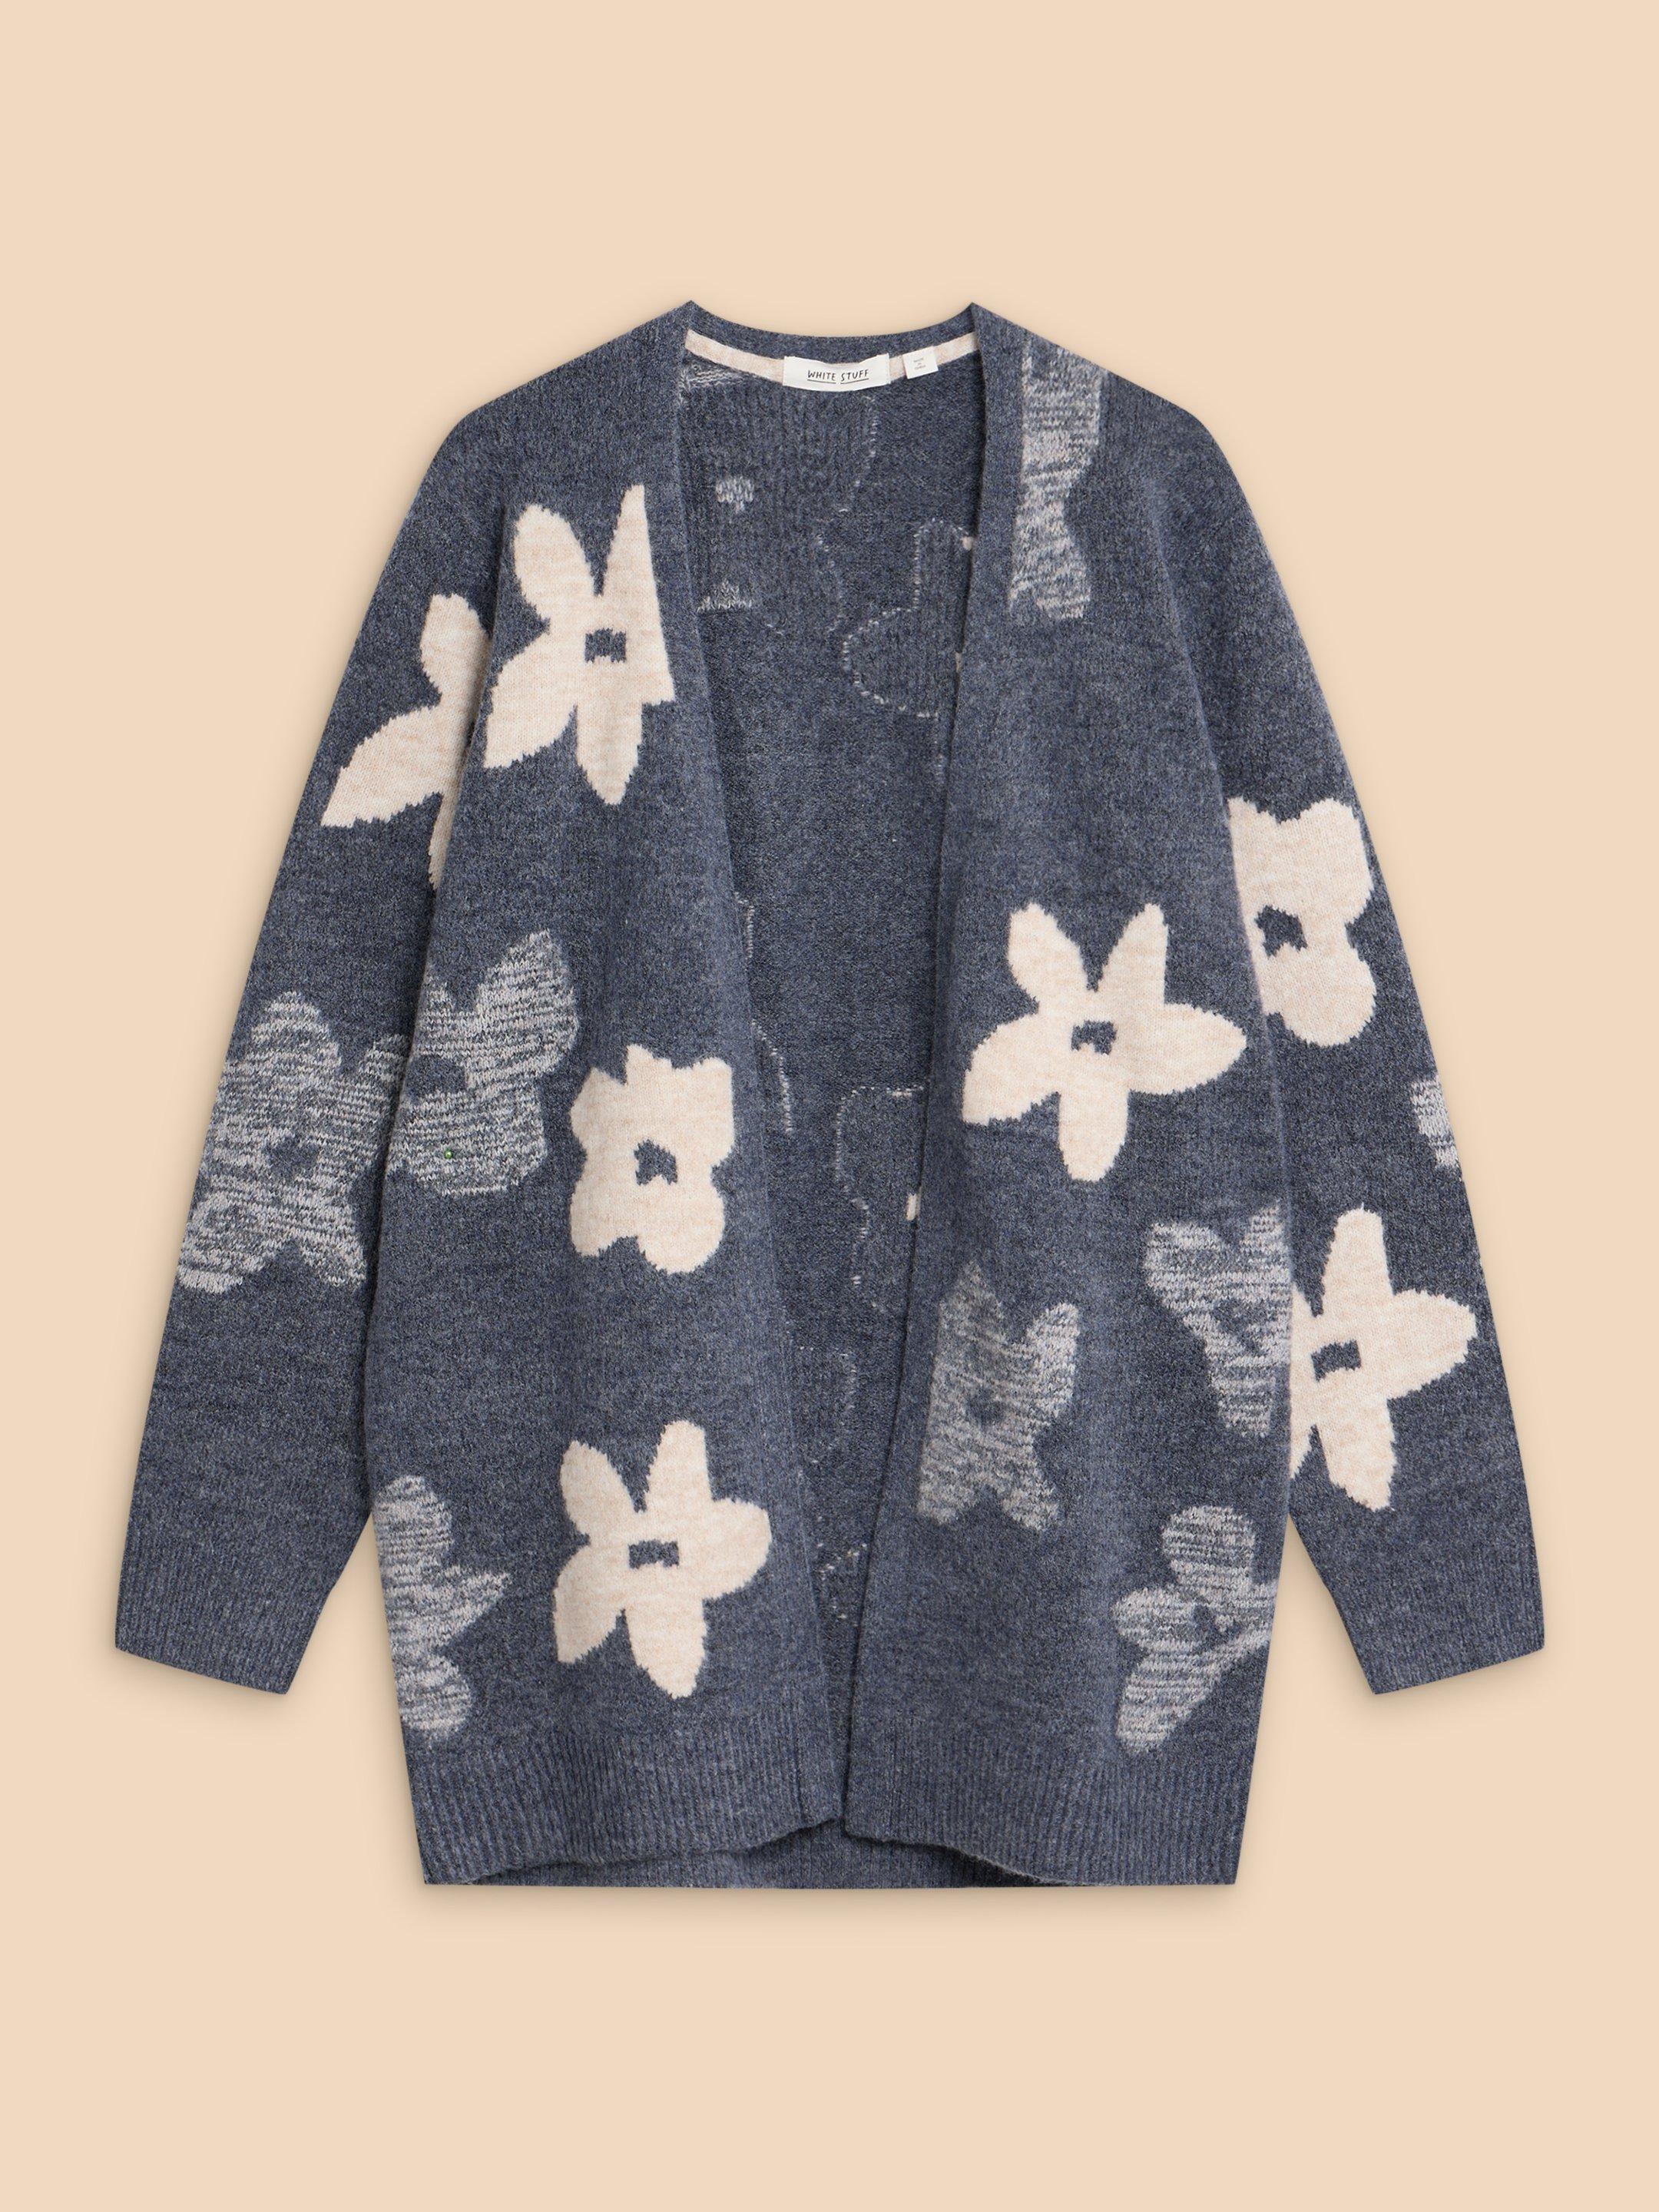 BLOSSOM LONGLINE CARDIGAN in BLUE MLT - FLAT FRONT